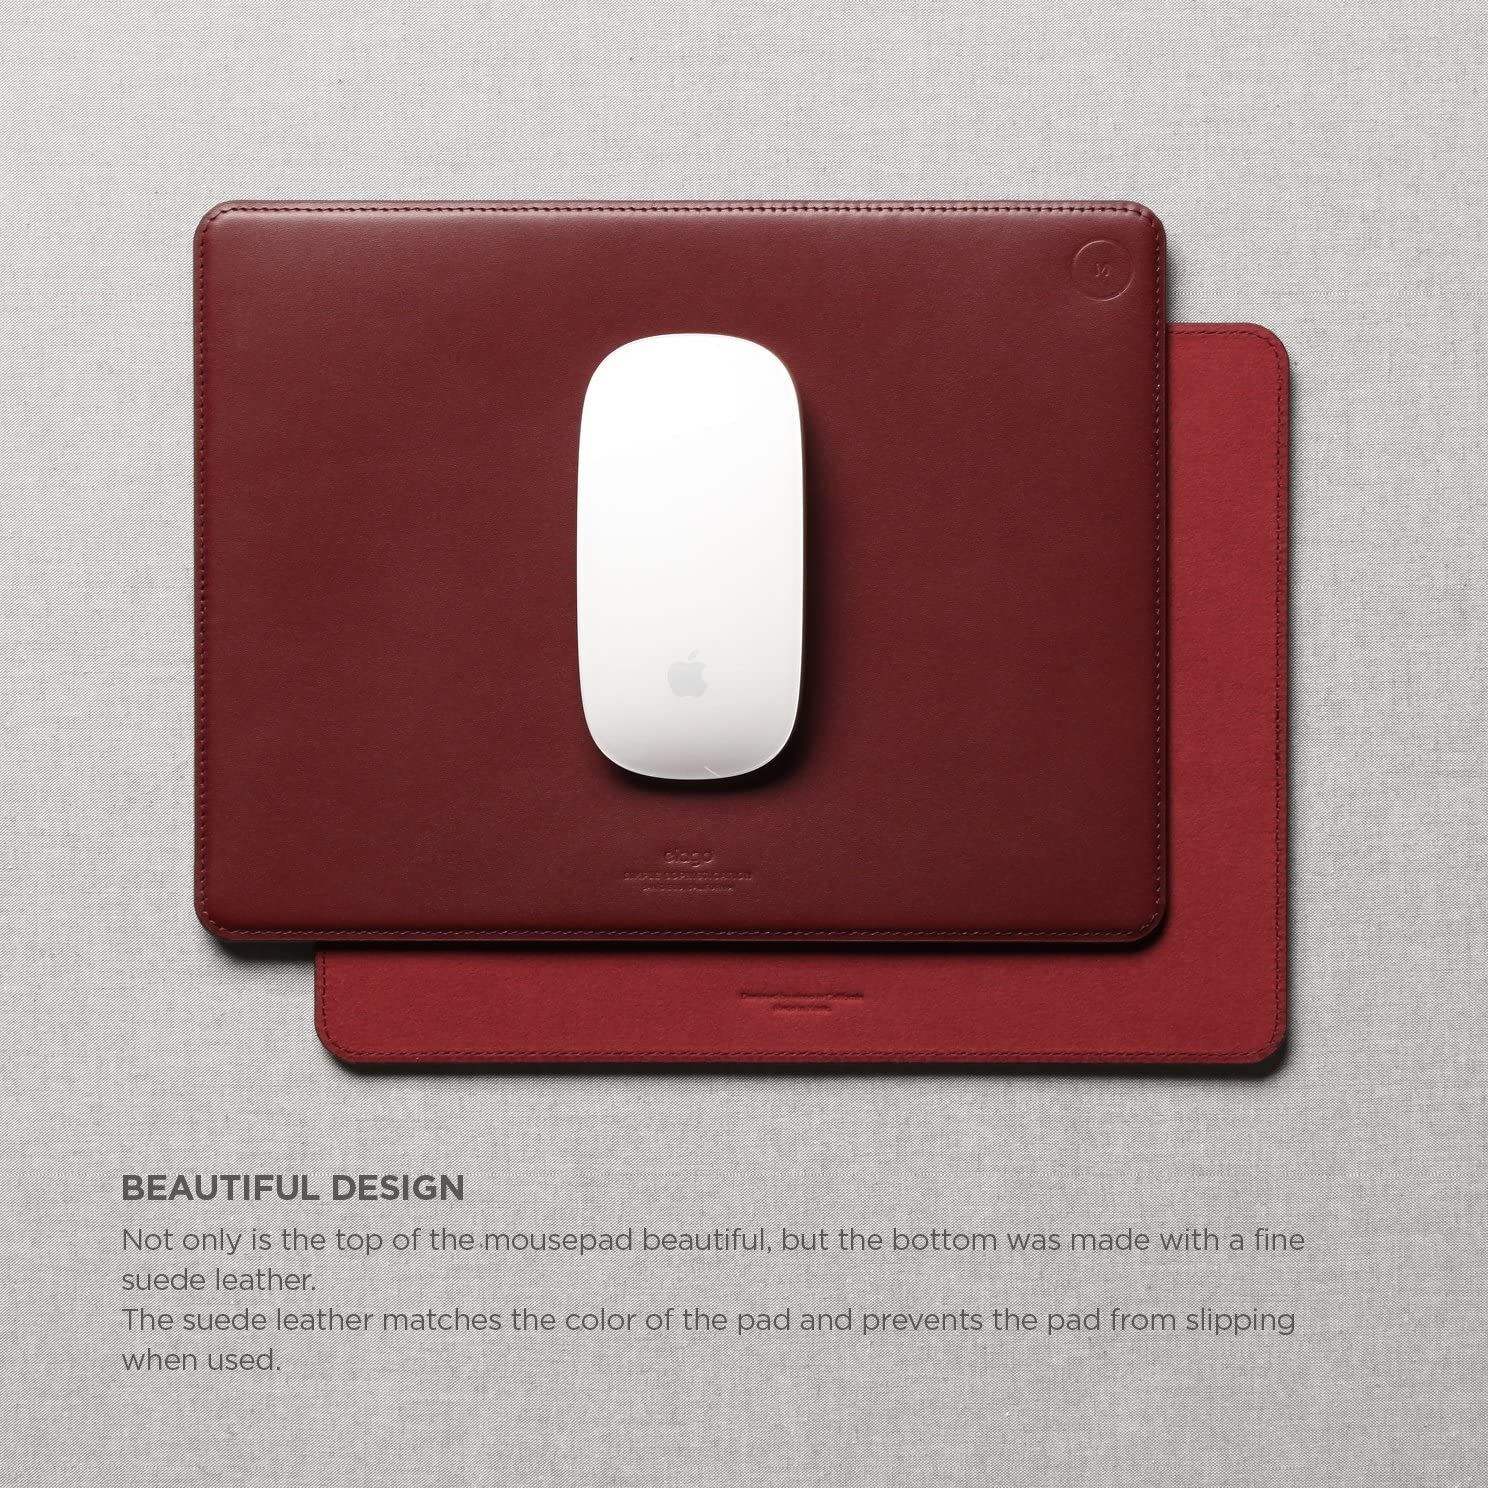 elago-leather-mouse-pad-dematino-mouse-pad-burgundy-6.jpg